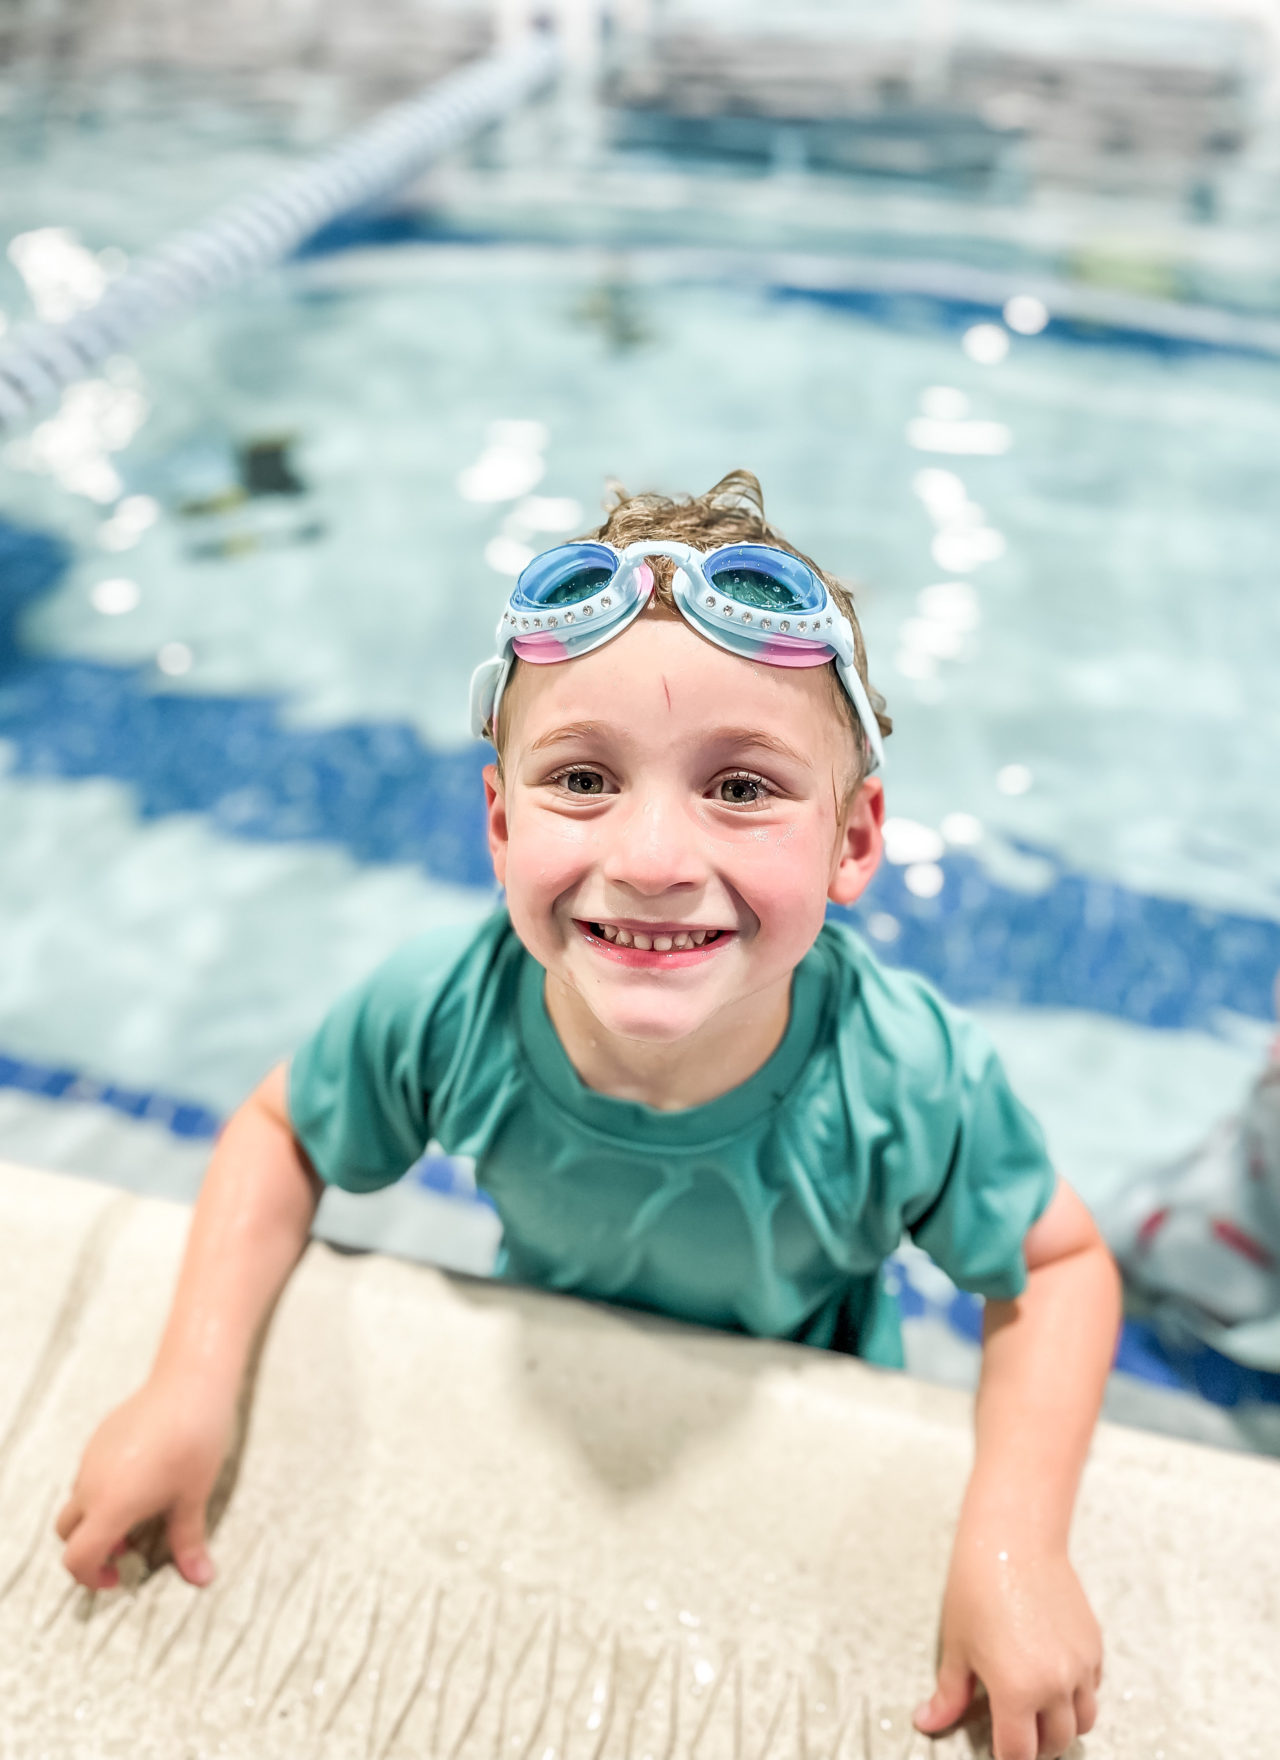 How to Calm Kids Who are Anxious About Swim Lessons